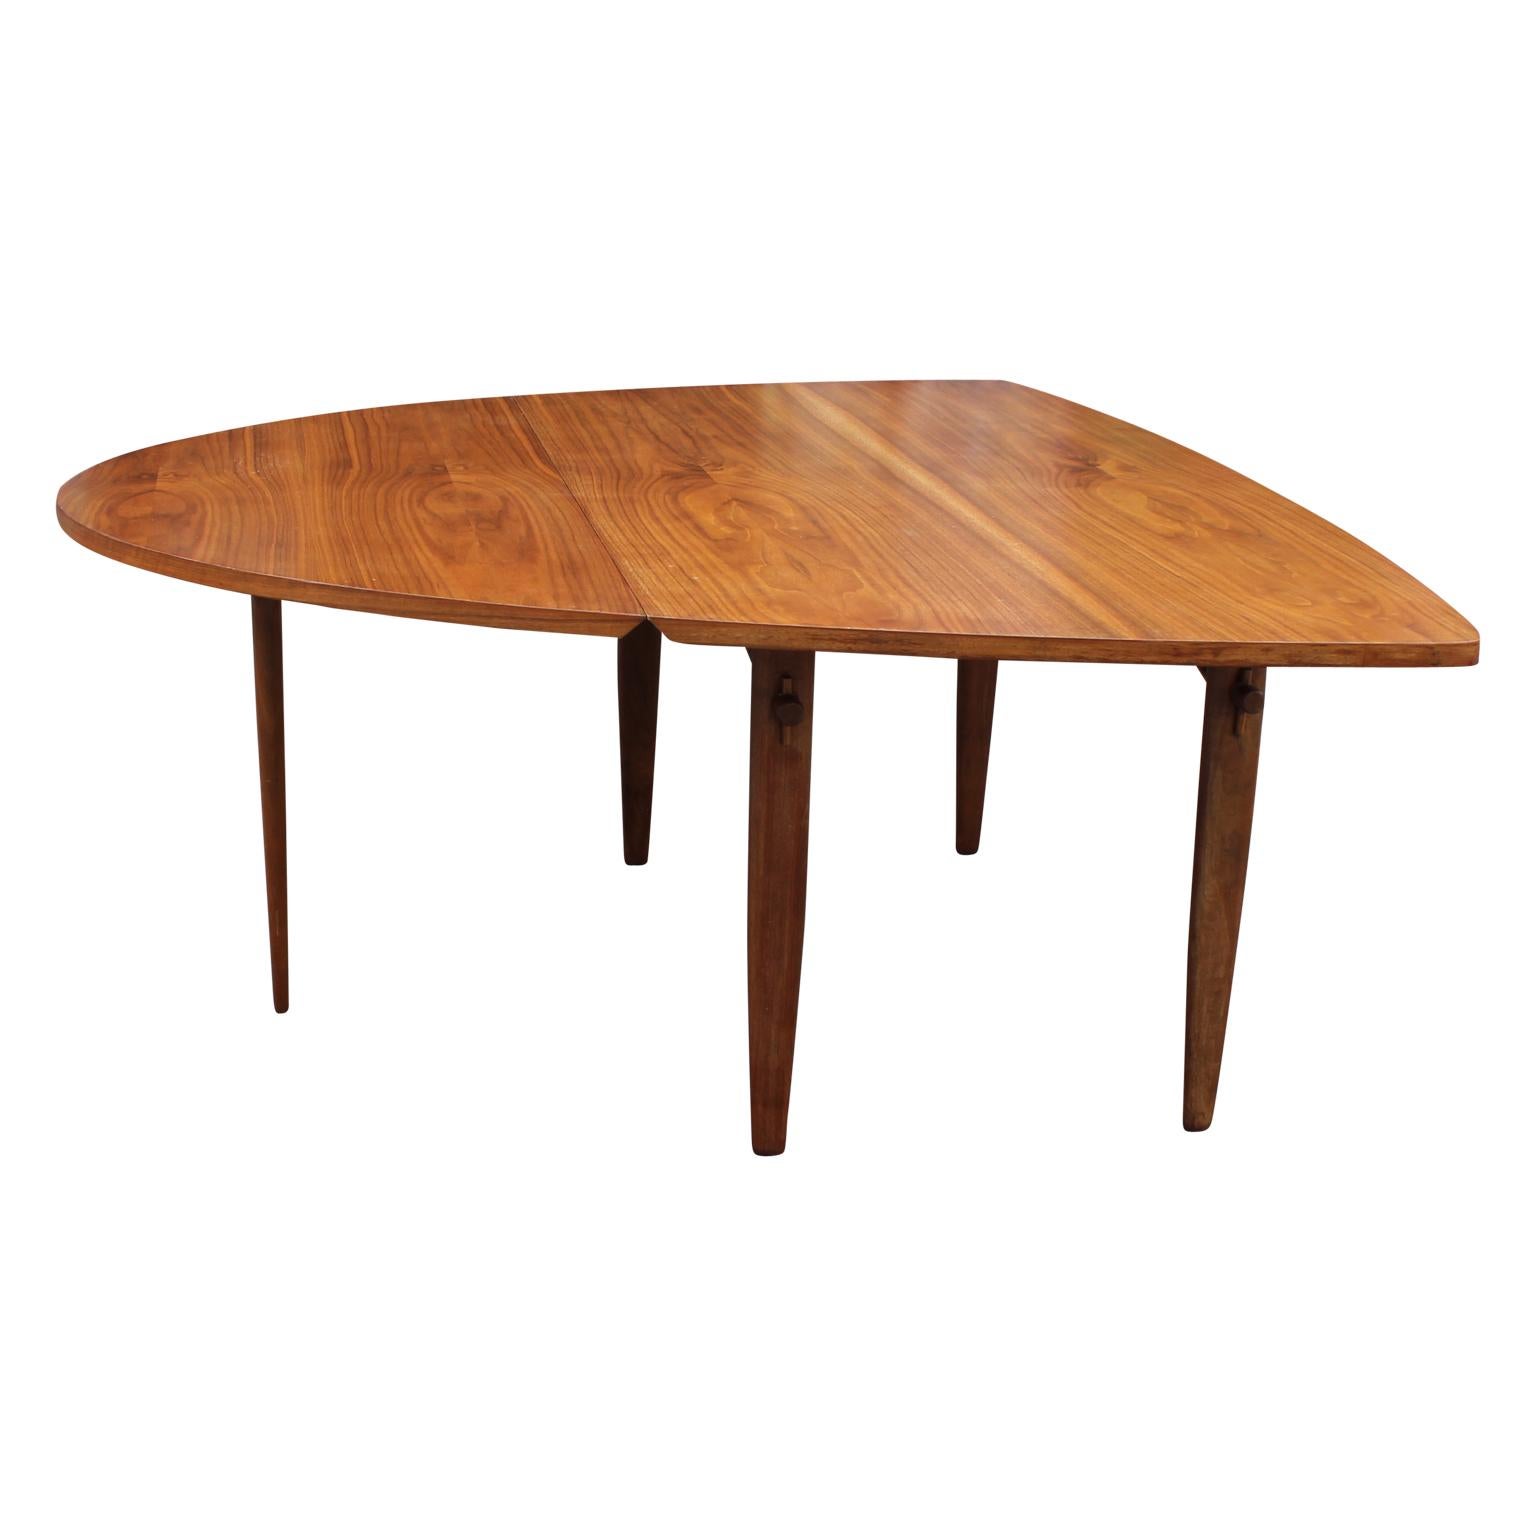 George Nakashima model 793 dining table. This iconic table was crafted beautifully for Widdicomb.
 

George Nakashima (USA, 1905-1990)
A master woodworker and M.I.T.-trained architect, George Nakashima was the leading light of the American